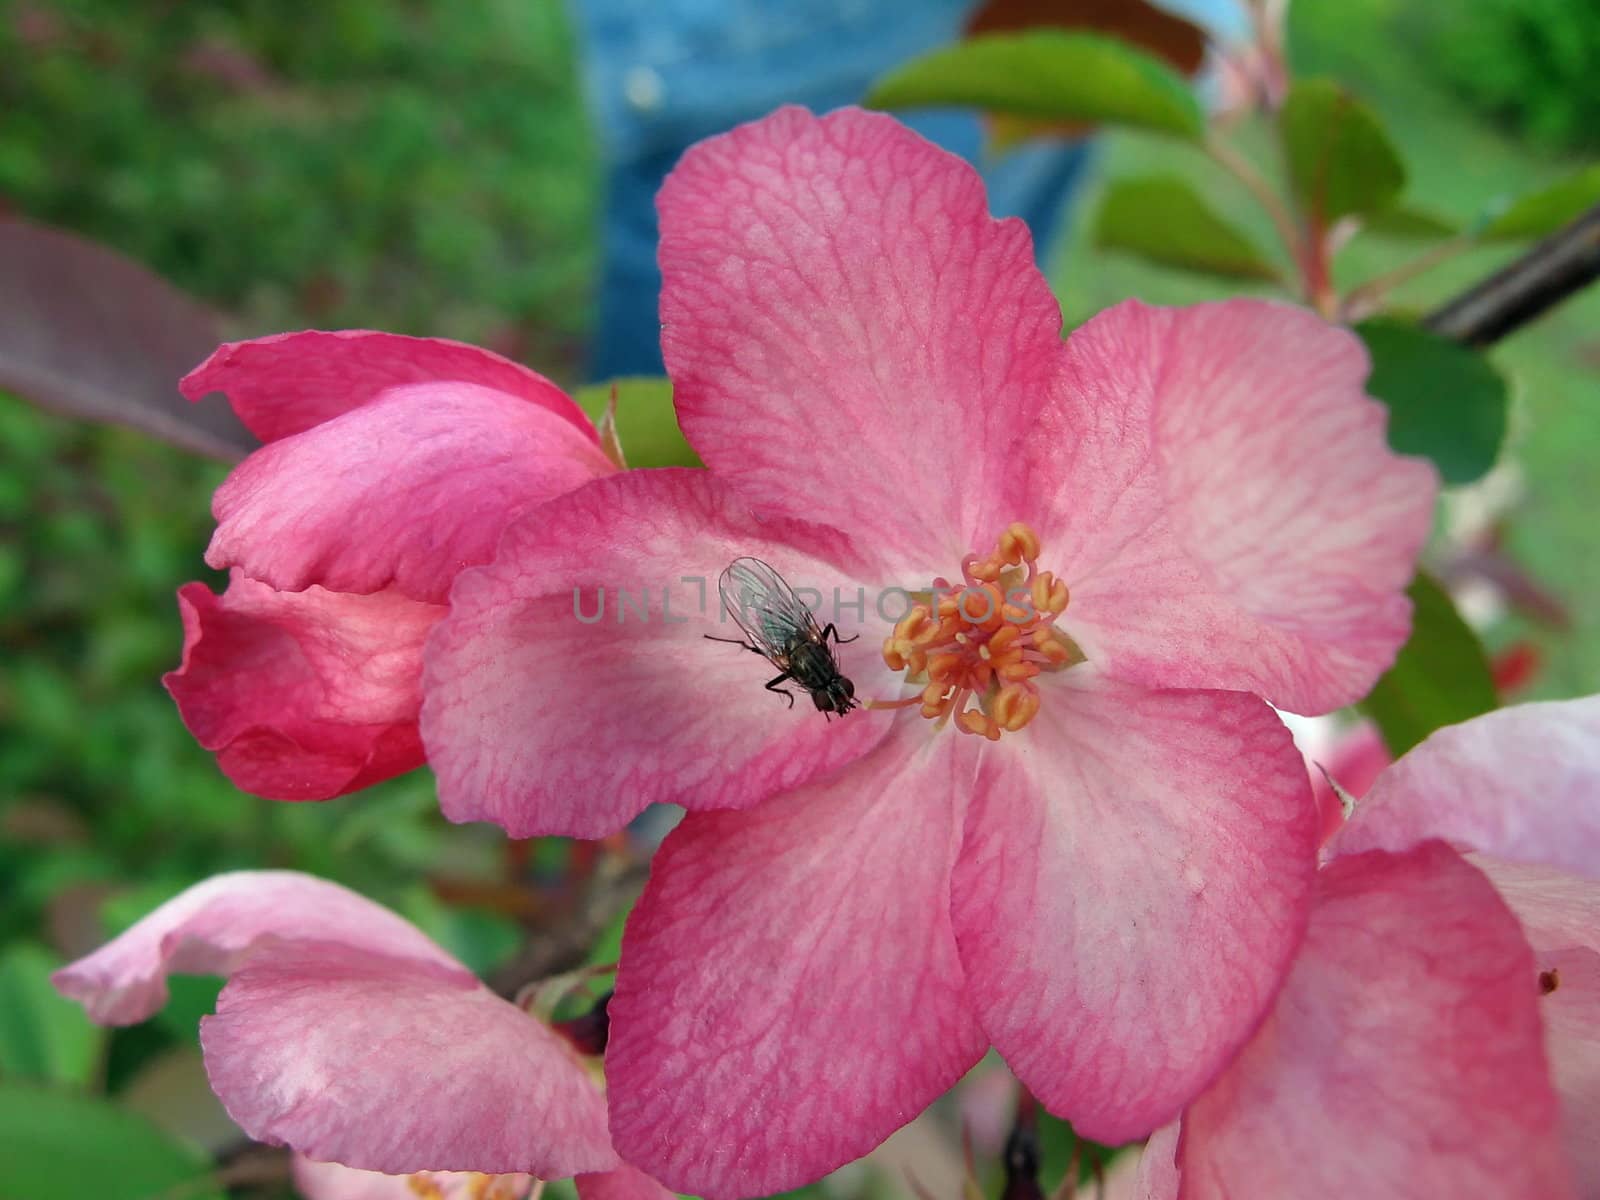 Fly on the pink flower by tomatto